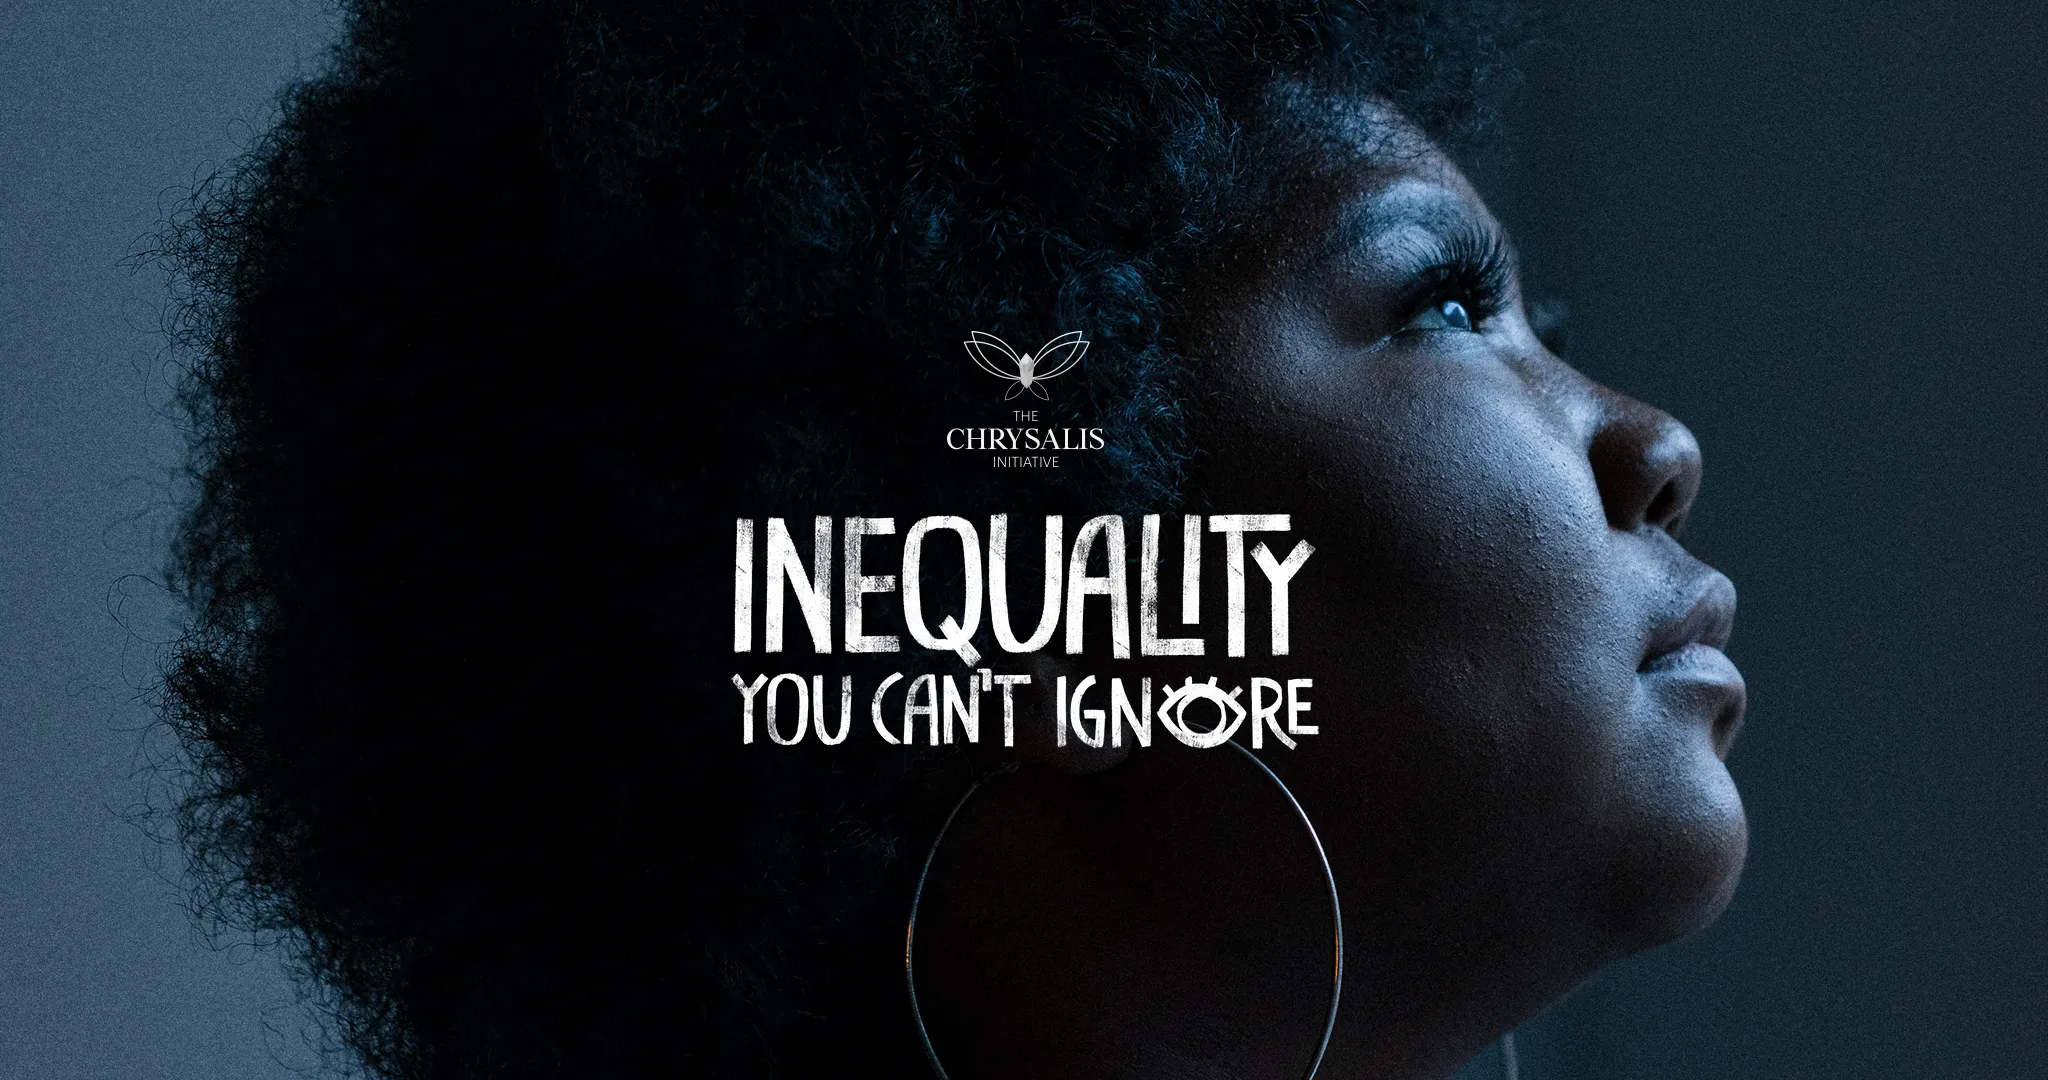 Image from the Inequality You Cant Ignore campaign